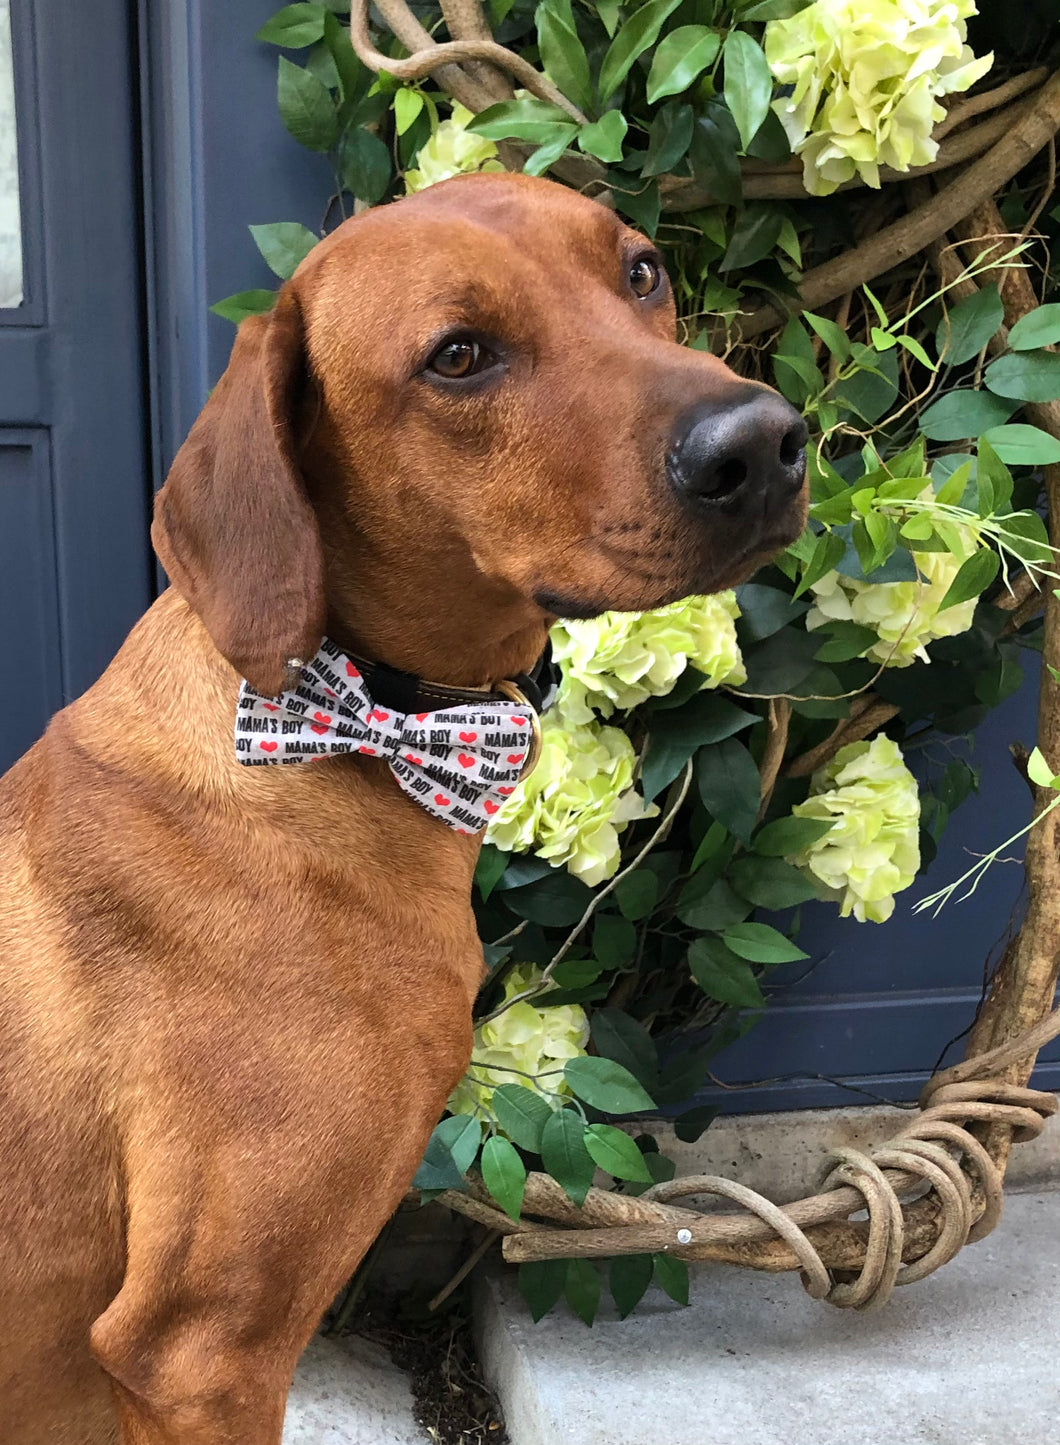 Koa's Ruff Life, Koa in the large mama's boy bow tie. Show off your fur baby's love for his mom!